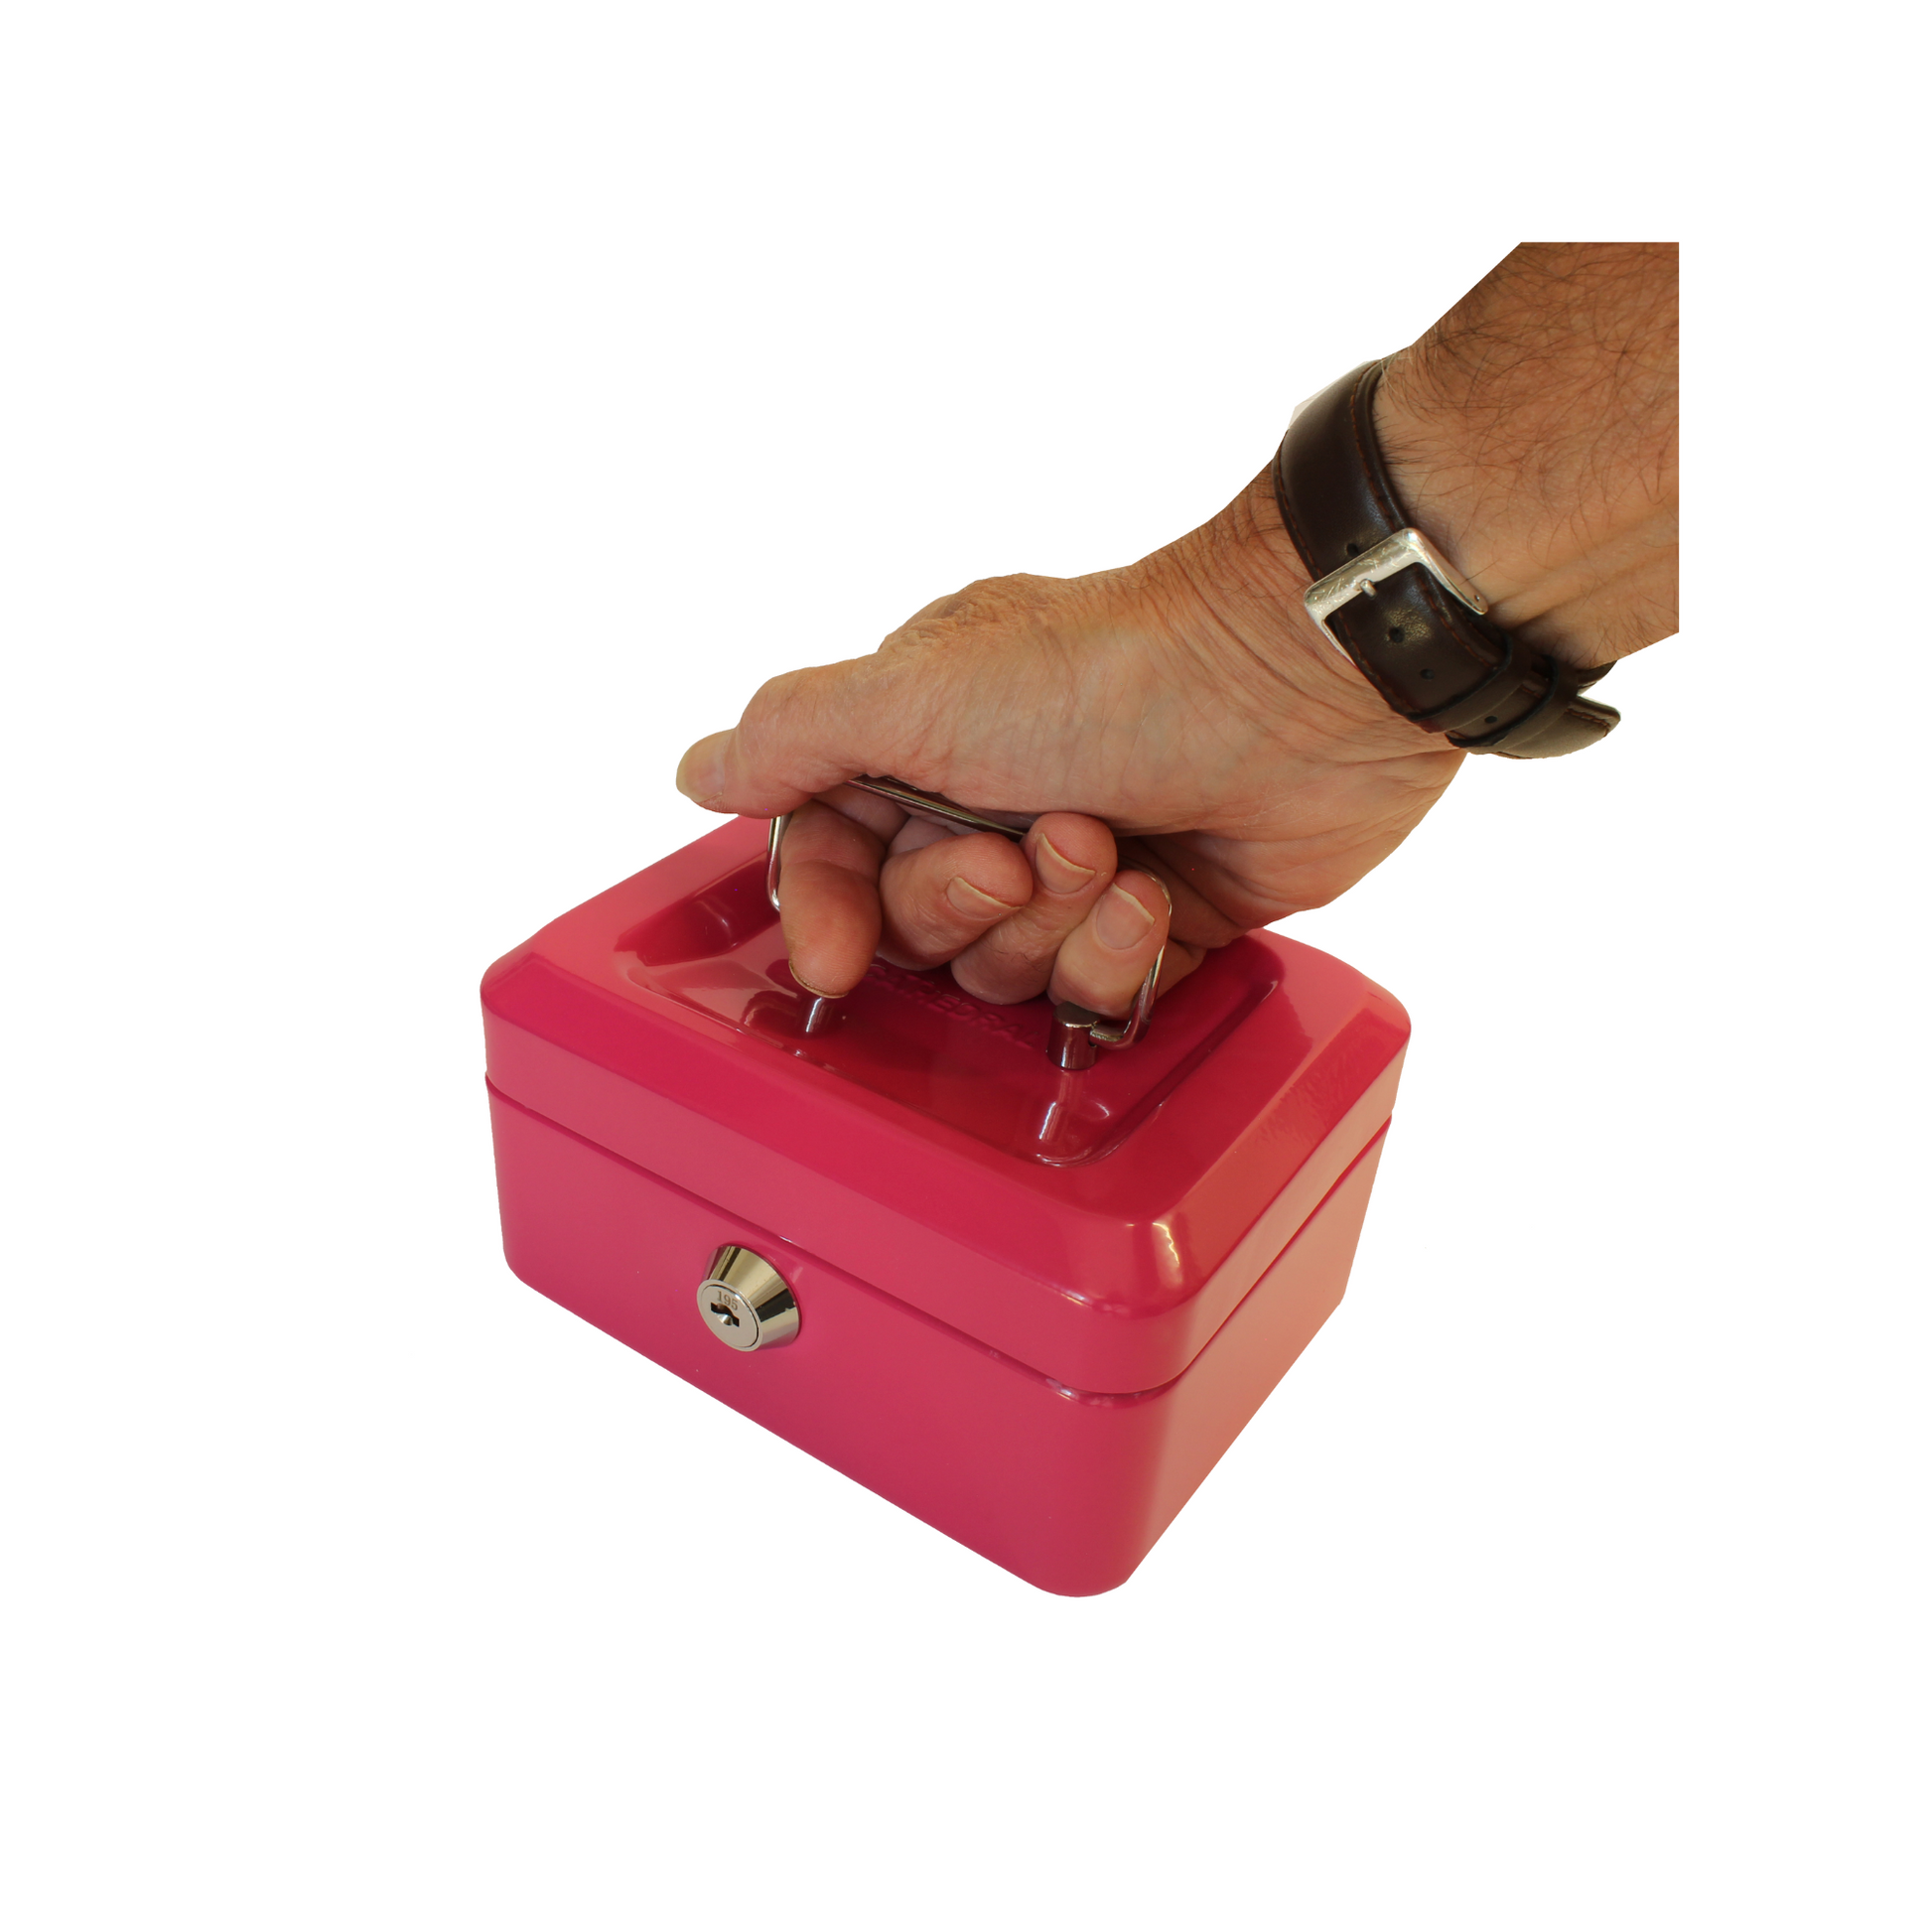 A hand lifting a 6-Inch key lockable pink cash box by the handle, showing the size comparison between a hand and the size of the box.